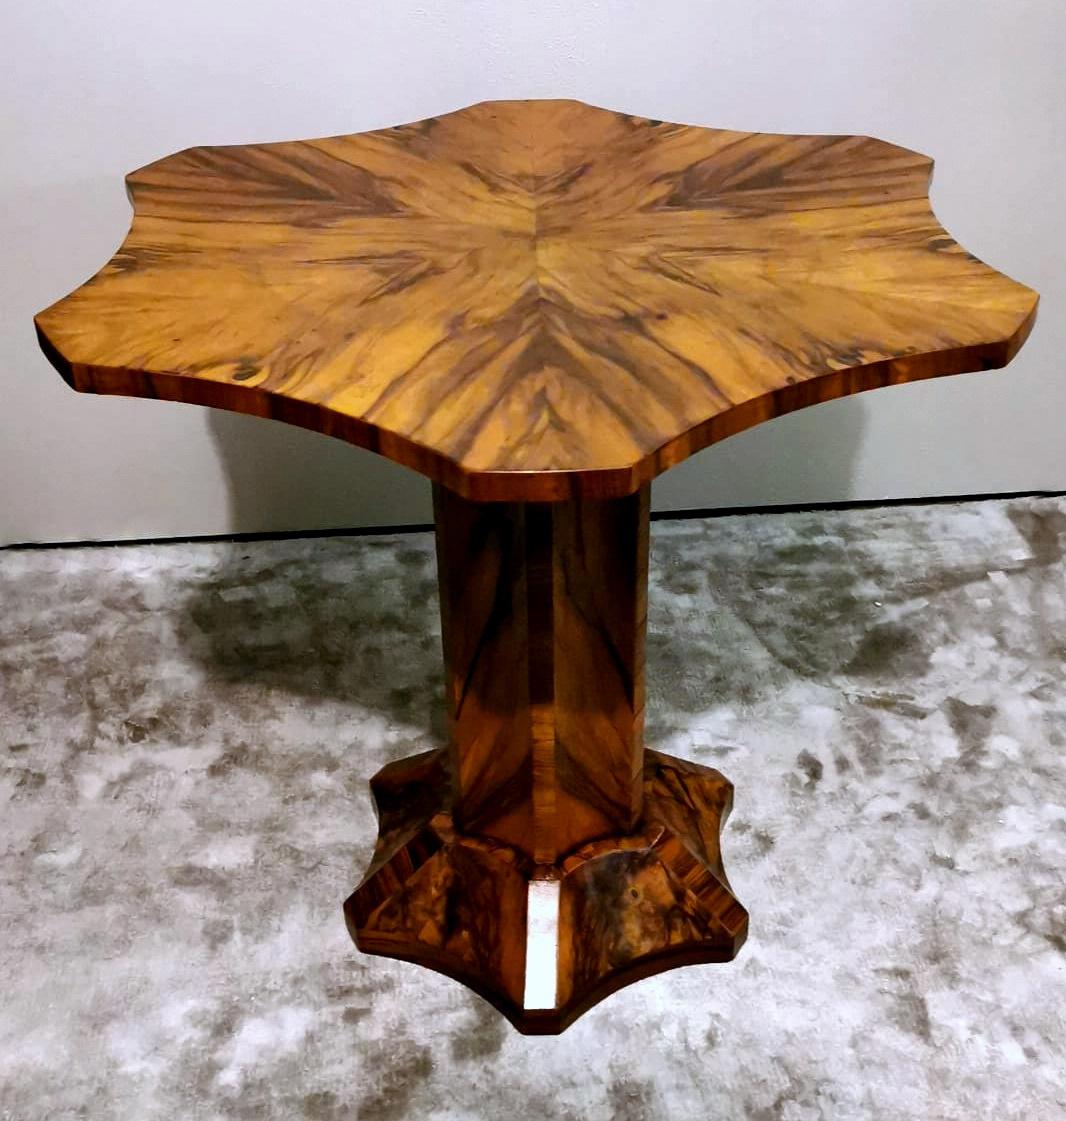 We kindly suggest that you read the entire description, as with it we try to give you detailed technical and historical information to guarantee the authenticity of our objects.
Refined and rare Italian Biedermeier-style coffee table; the particular